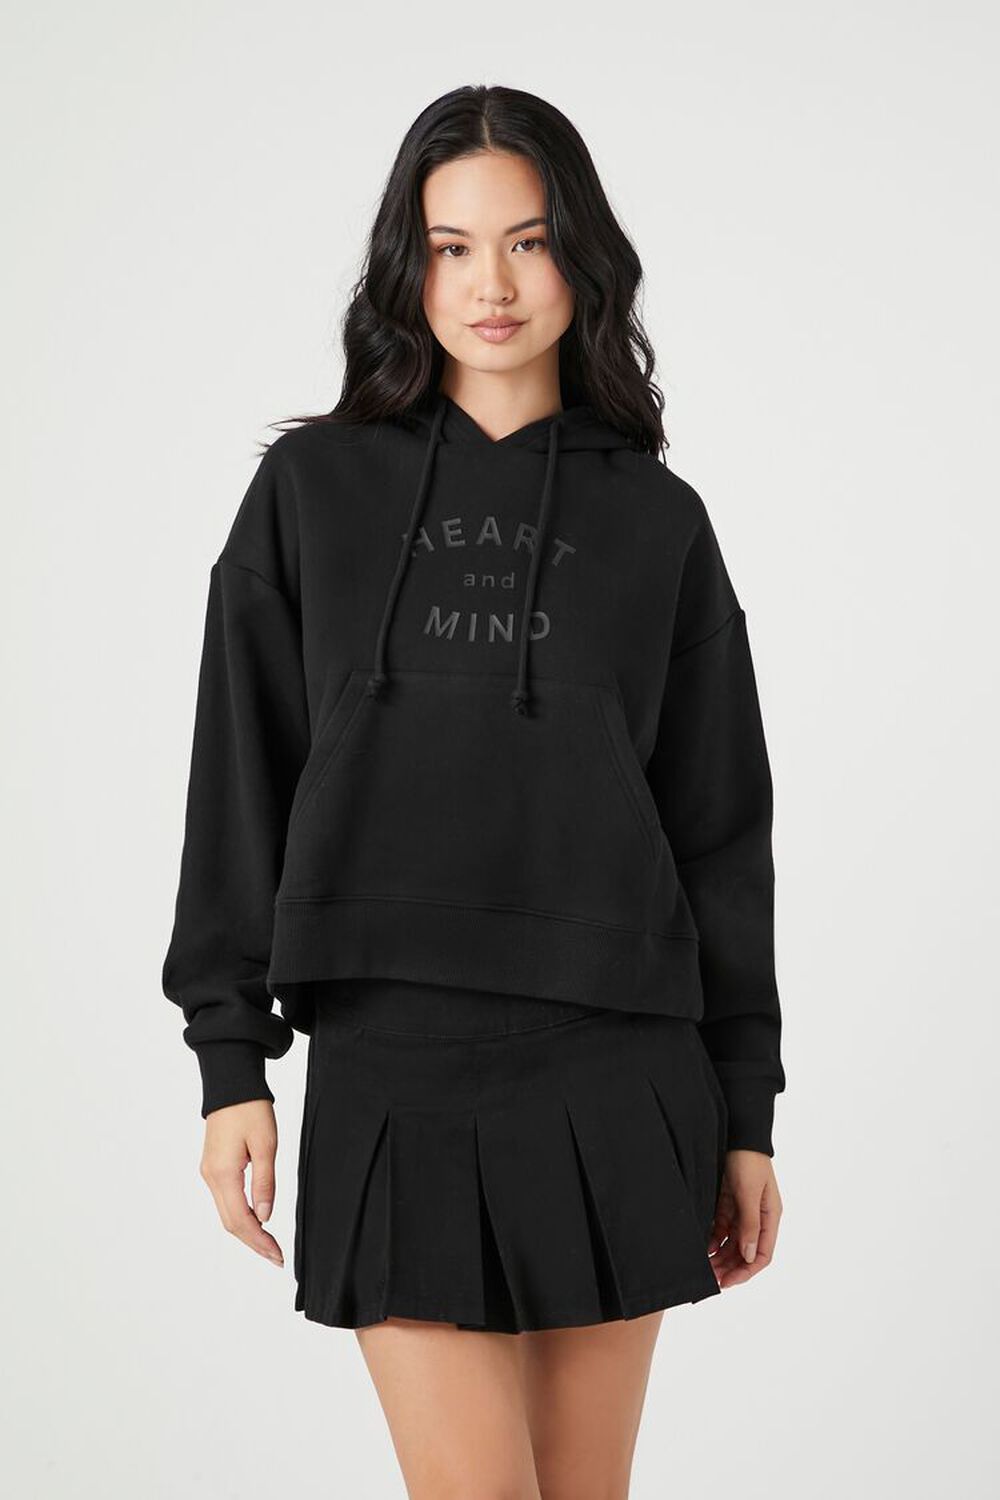 Forever 21 don’t mind me hoodie size XL